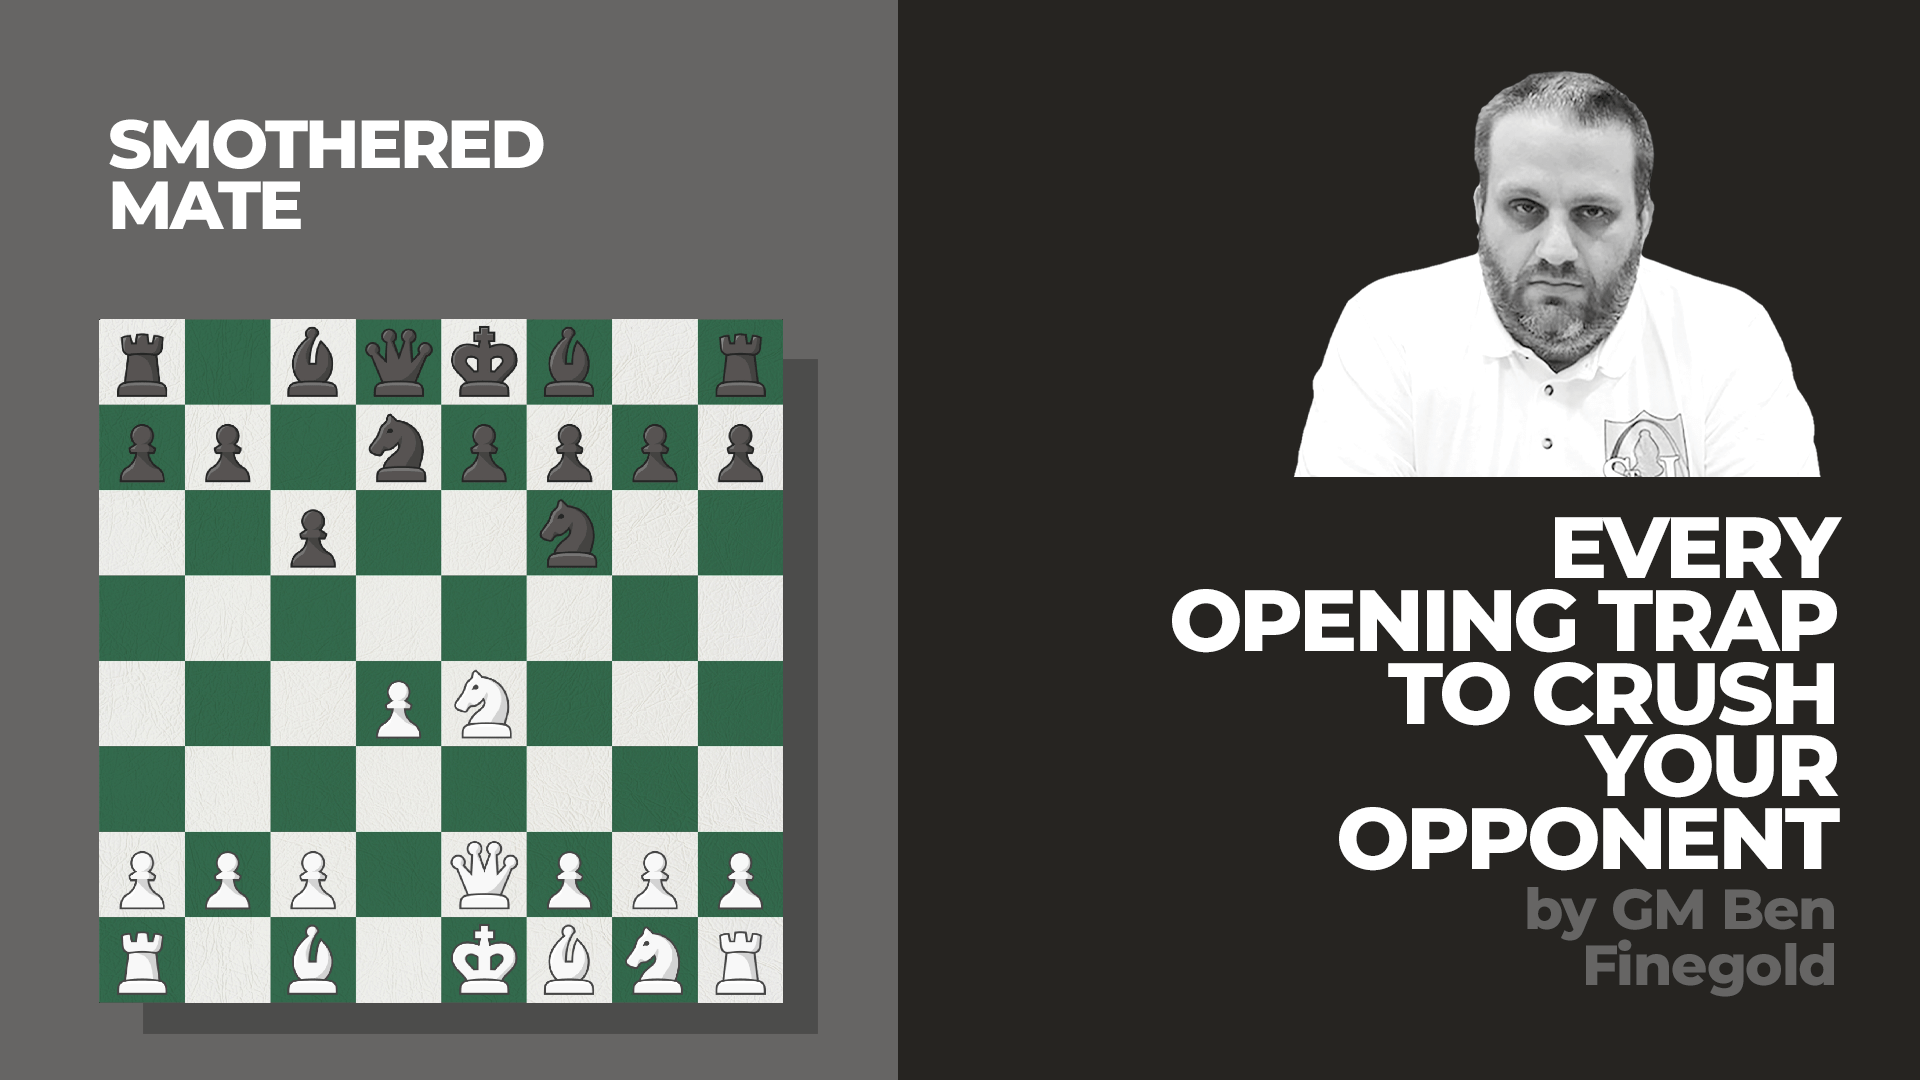 Smother Mate Opening Trap #chess #chesstok #chessman #openingtrap